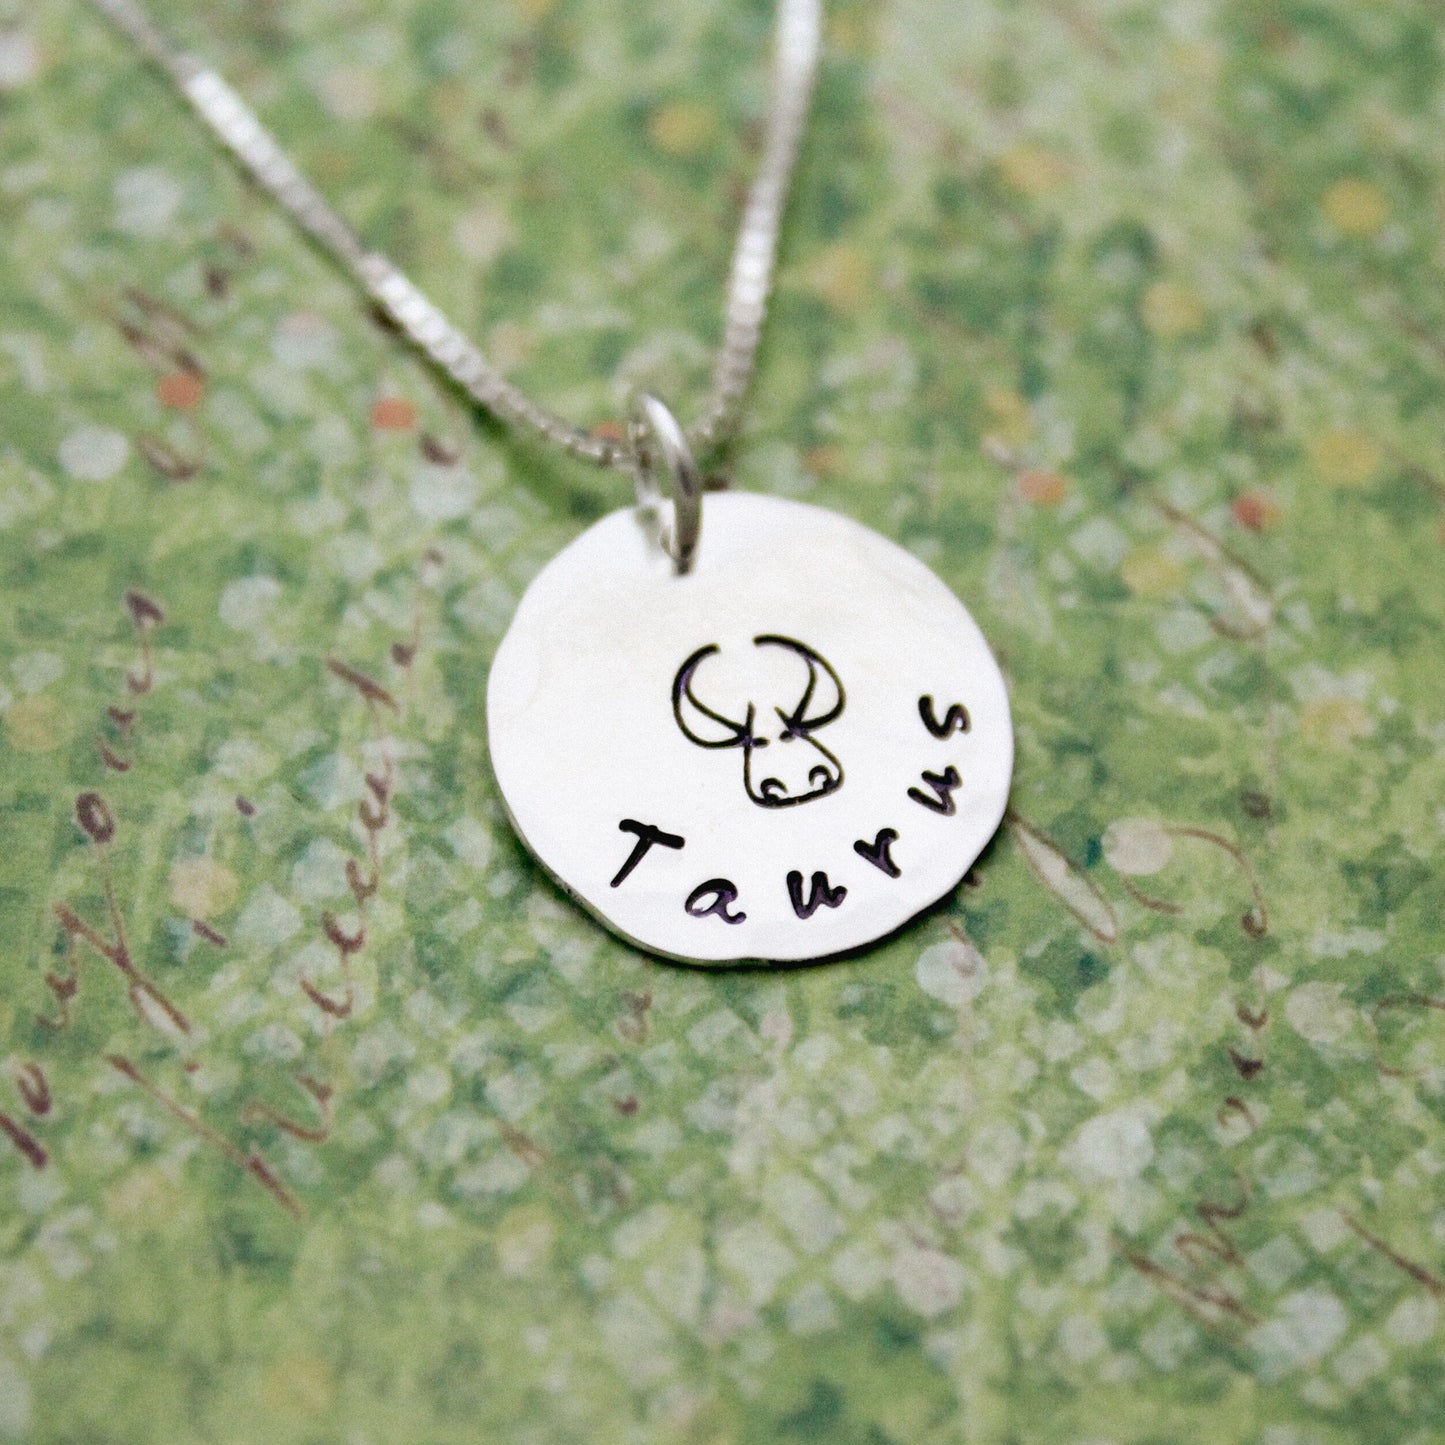 Taurus Zodiac Necklace, Sterling Silver Taurus Zodiac Necklace, Cute Boho Gift, Taurus Birthday Jewelry, Zodiac Sign Birthday Gift for Her